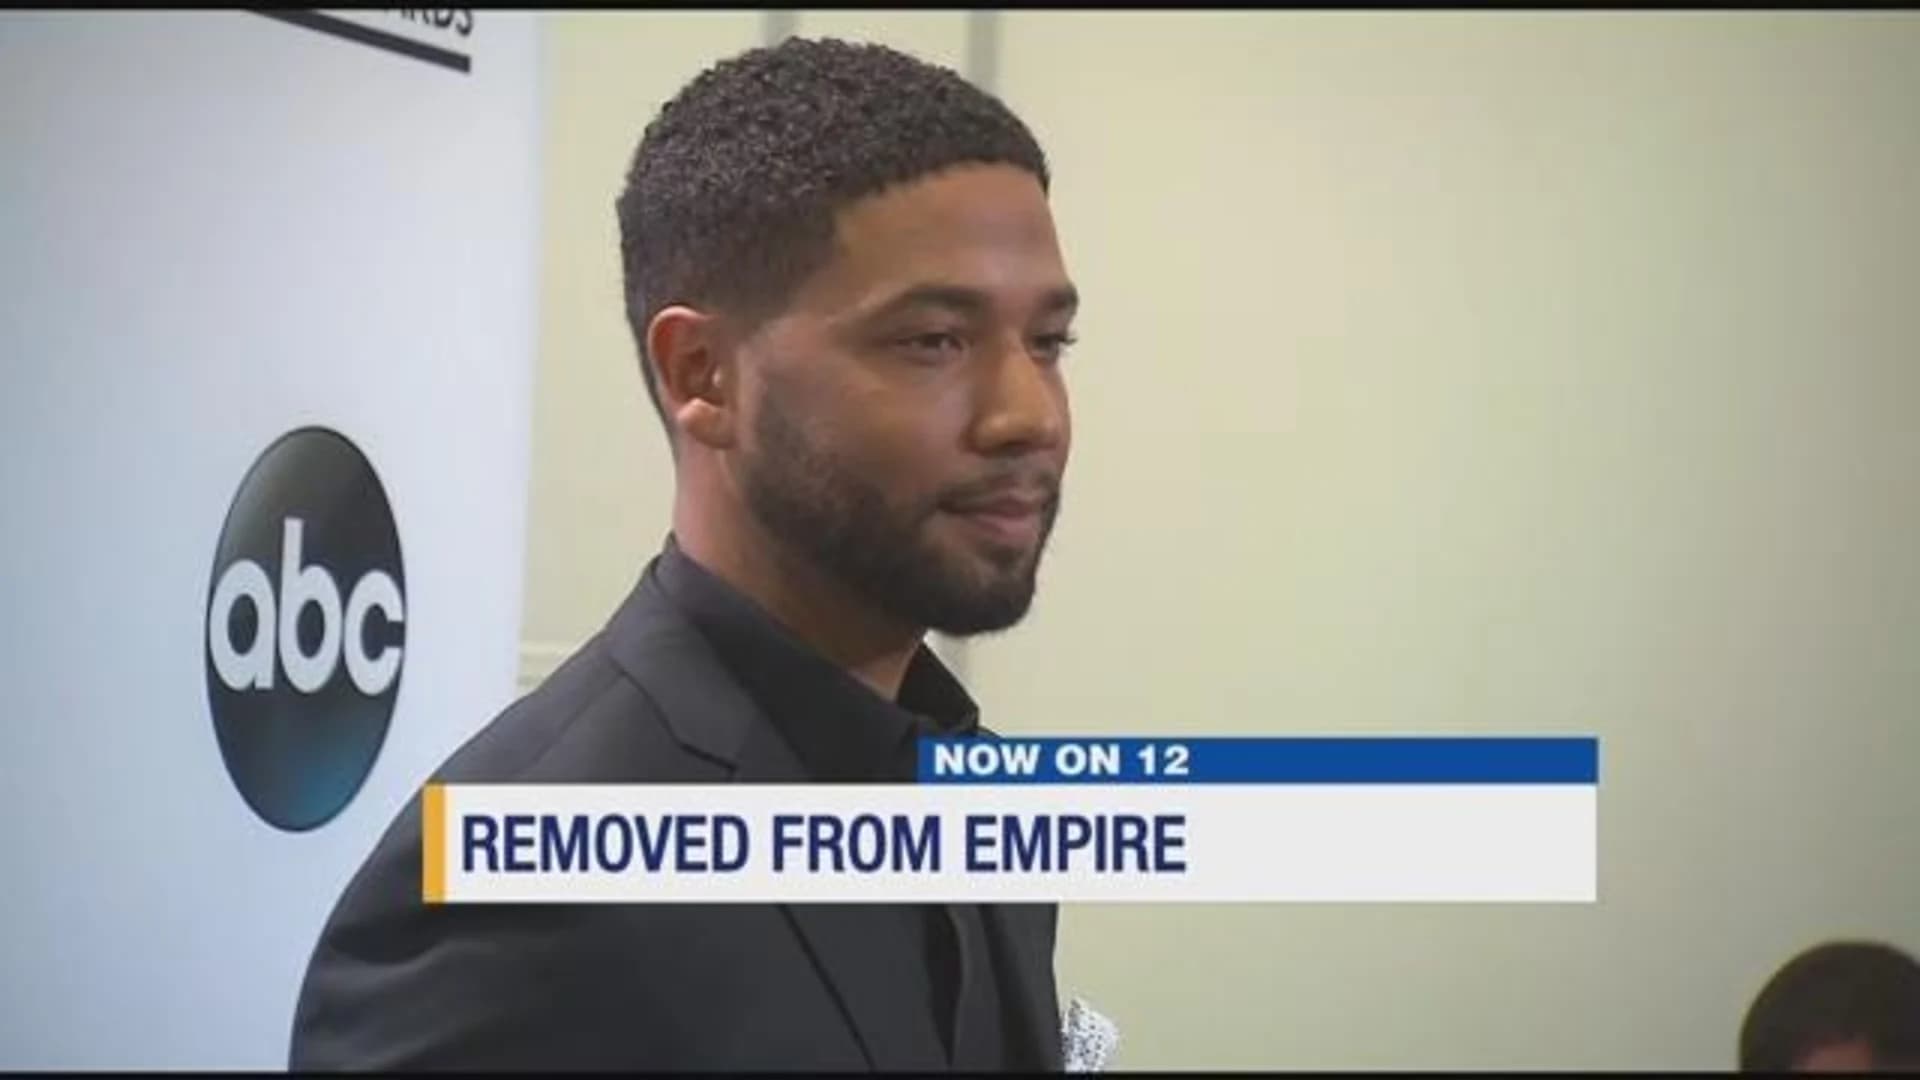 If proven, Smollett allegations could be a 'career killer'